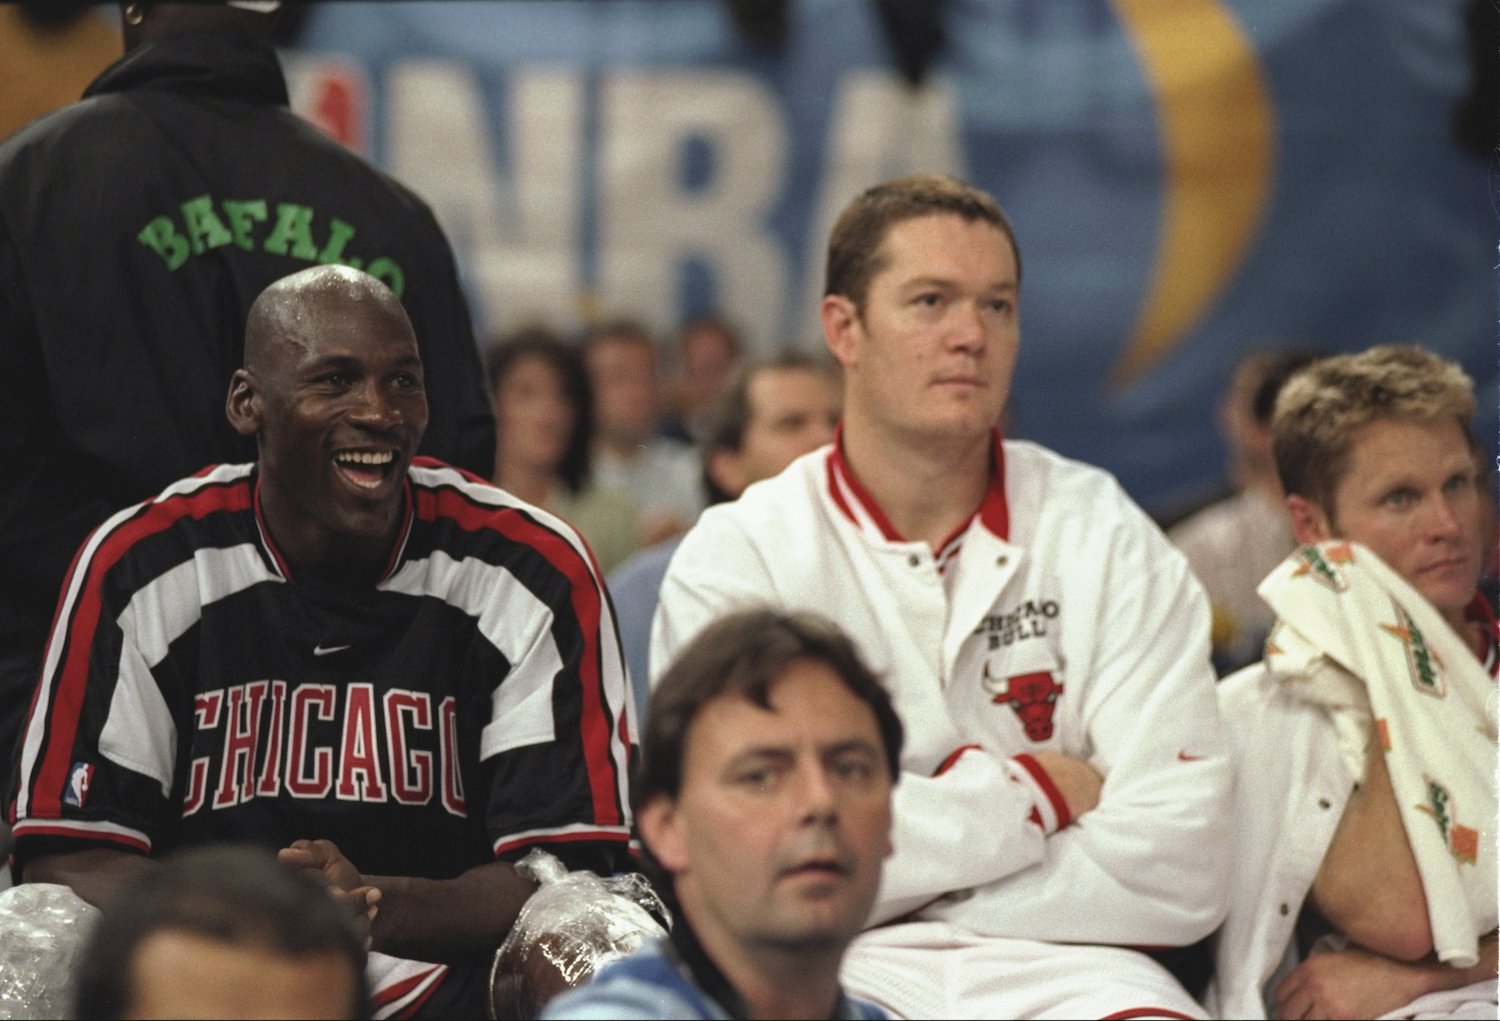 Michael Jordan (L) and Luc Longley (R) sit on the bench during a 1997 scrimmage.